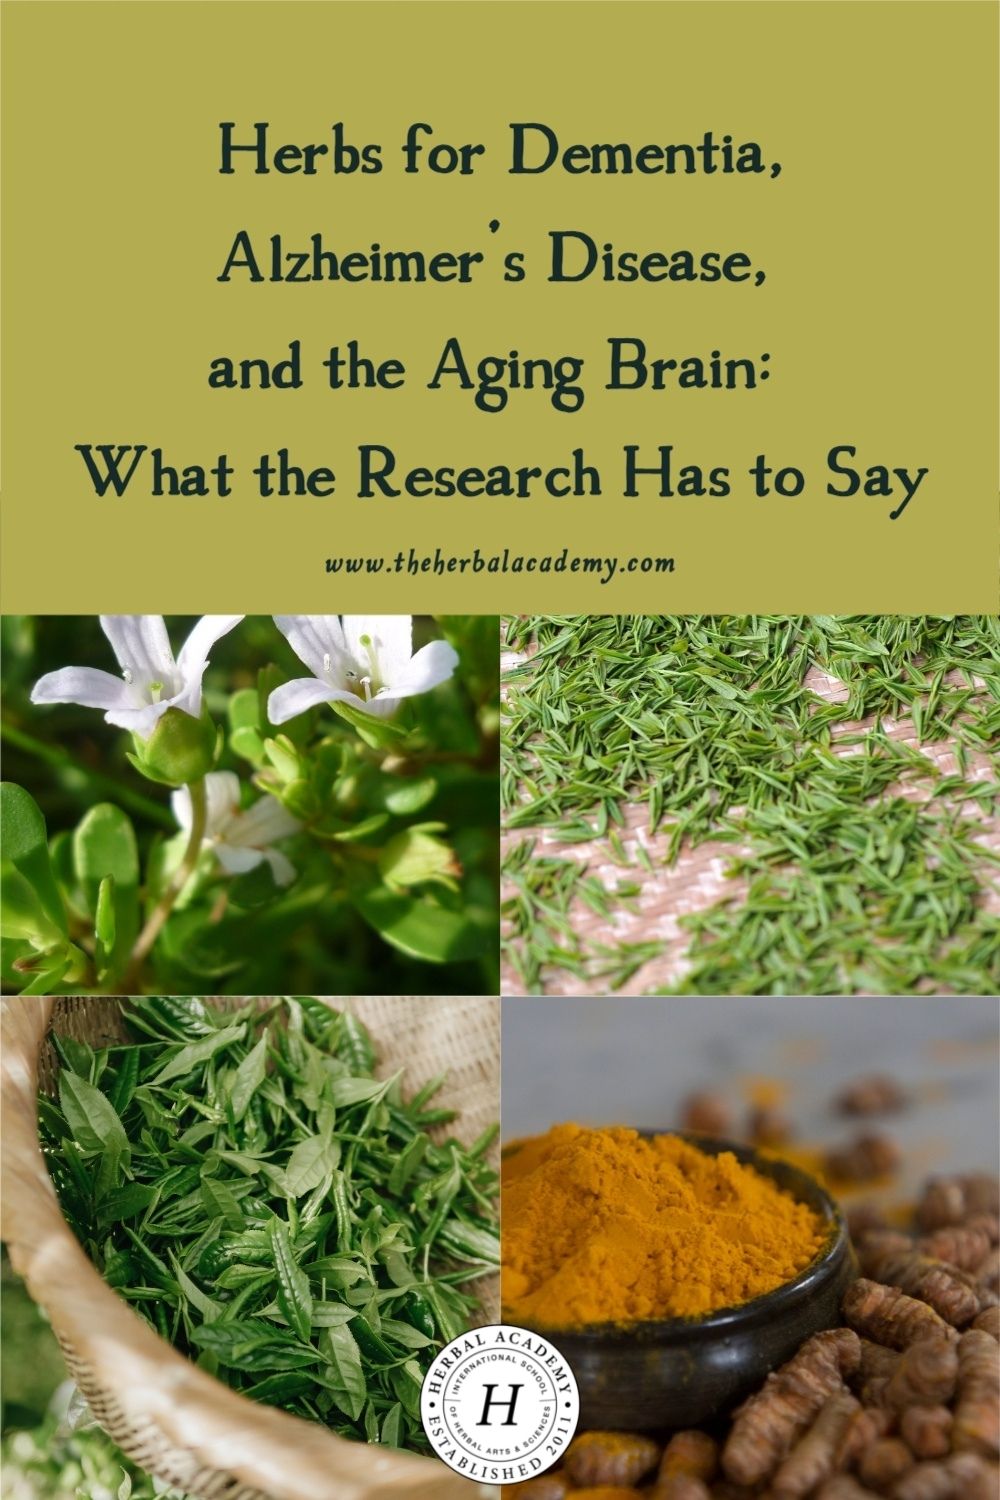 Herbs for Dementia, Alzheimer’s Disease, and the Aging Brain: What the Research Has to Say | Herbal Academy | Most of us will be touched by Alzheimer’s disease or dementia in some way. Looking at herbs for dementia and Alzheimer's offers a ray of hope.